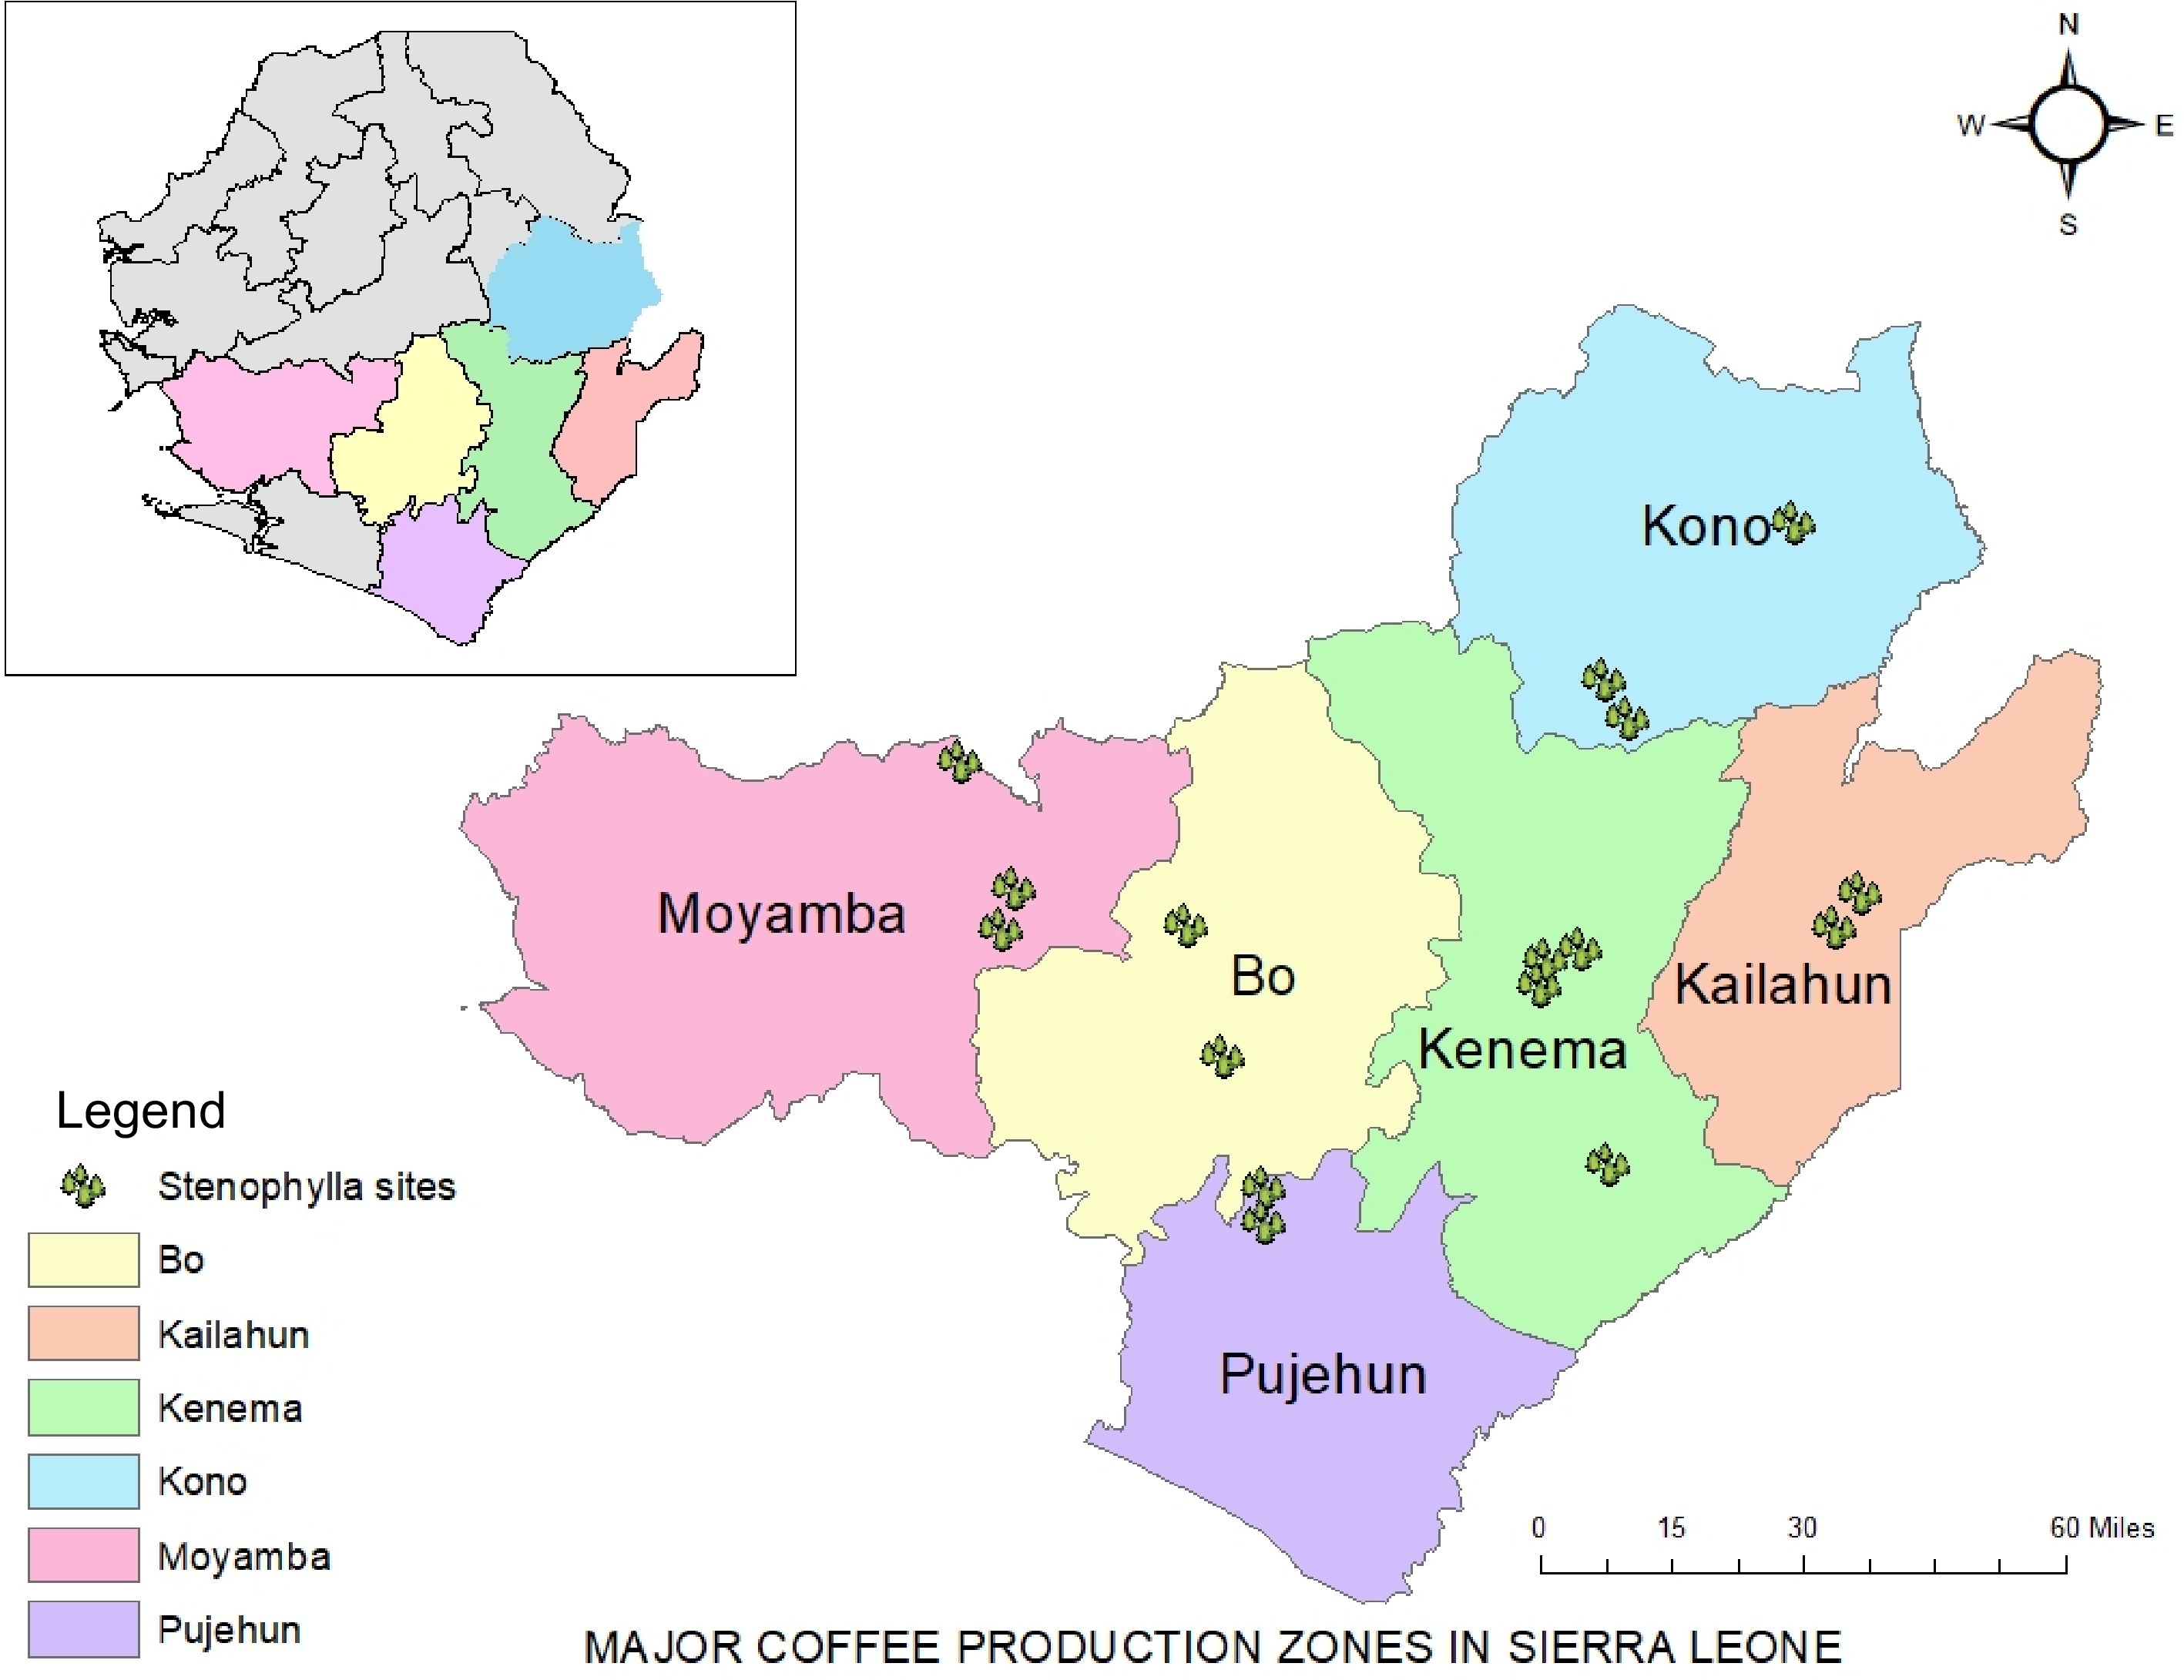 Distribution of arabica and conilon coffee varieties throughout the